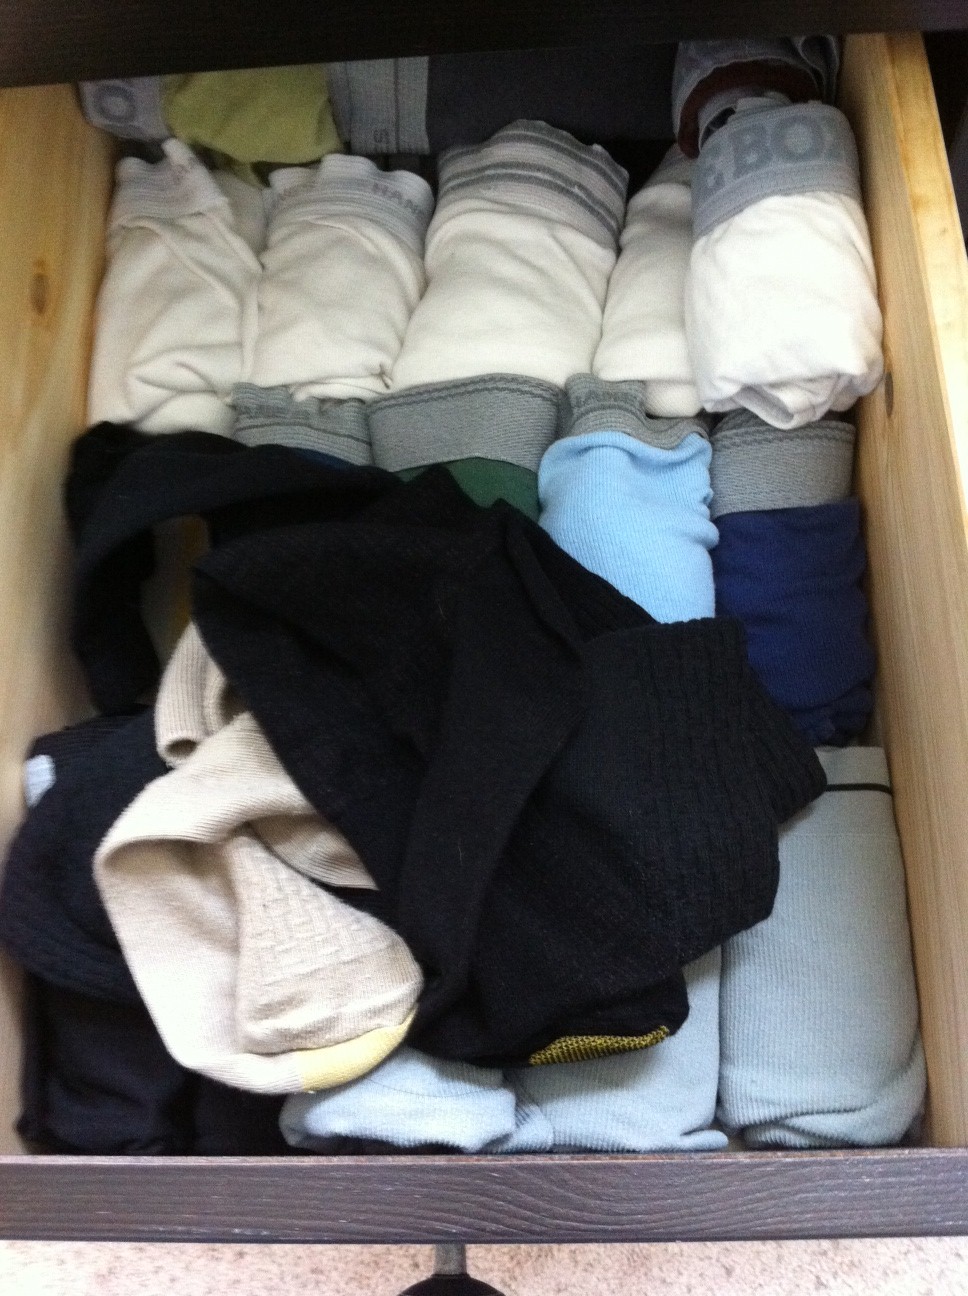 Mundane Entertainment: The Proof is in The Underwear Drawer